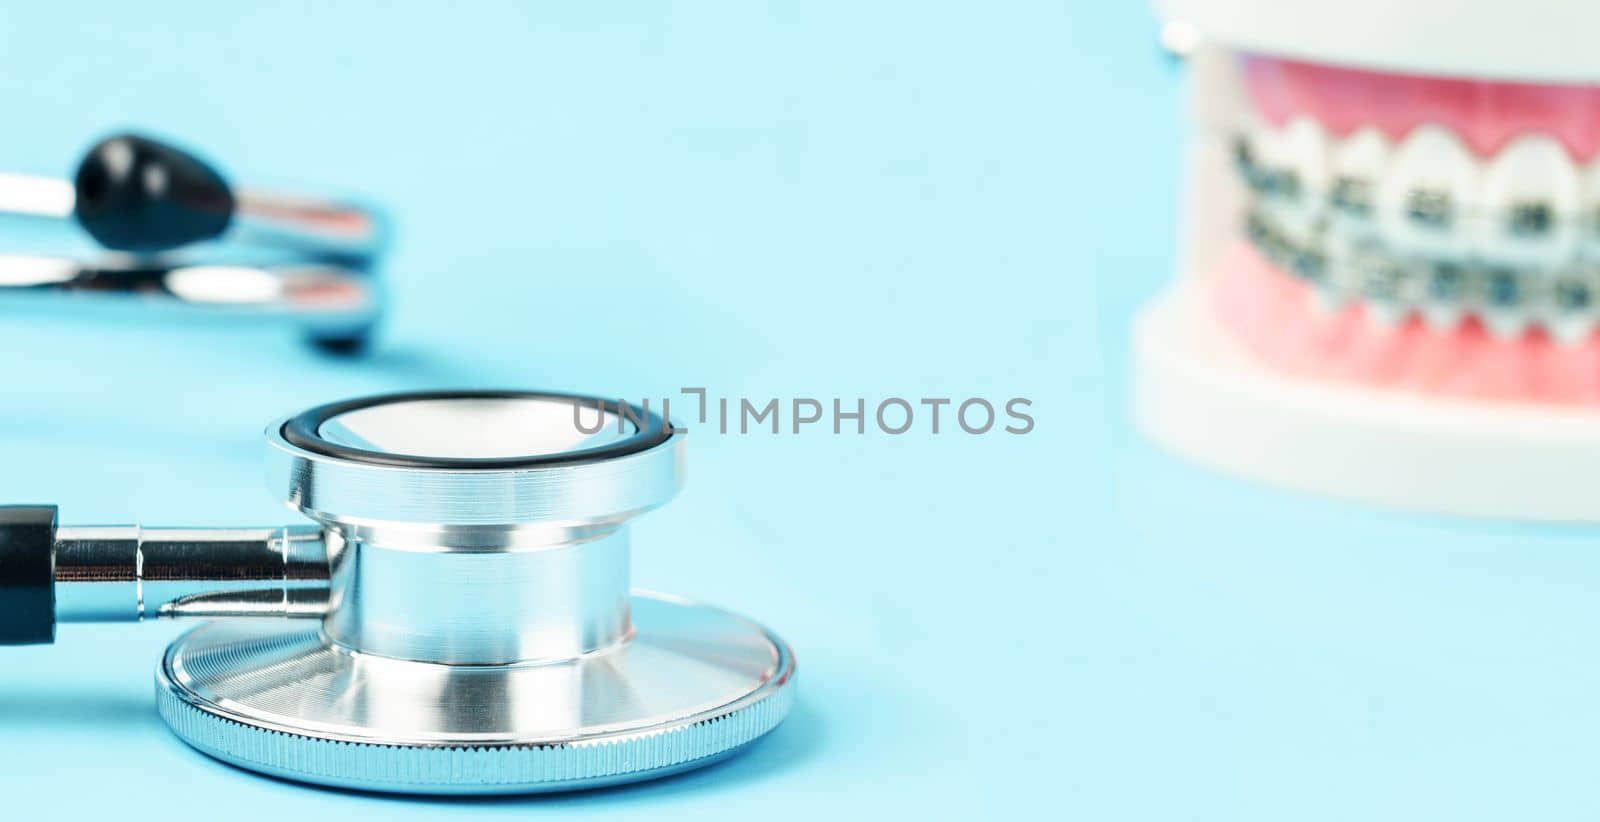 A Medicine equipment stethoscope and metal wire dental braces on model teeth on blue background. Health dental care concept. by Gamjai